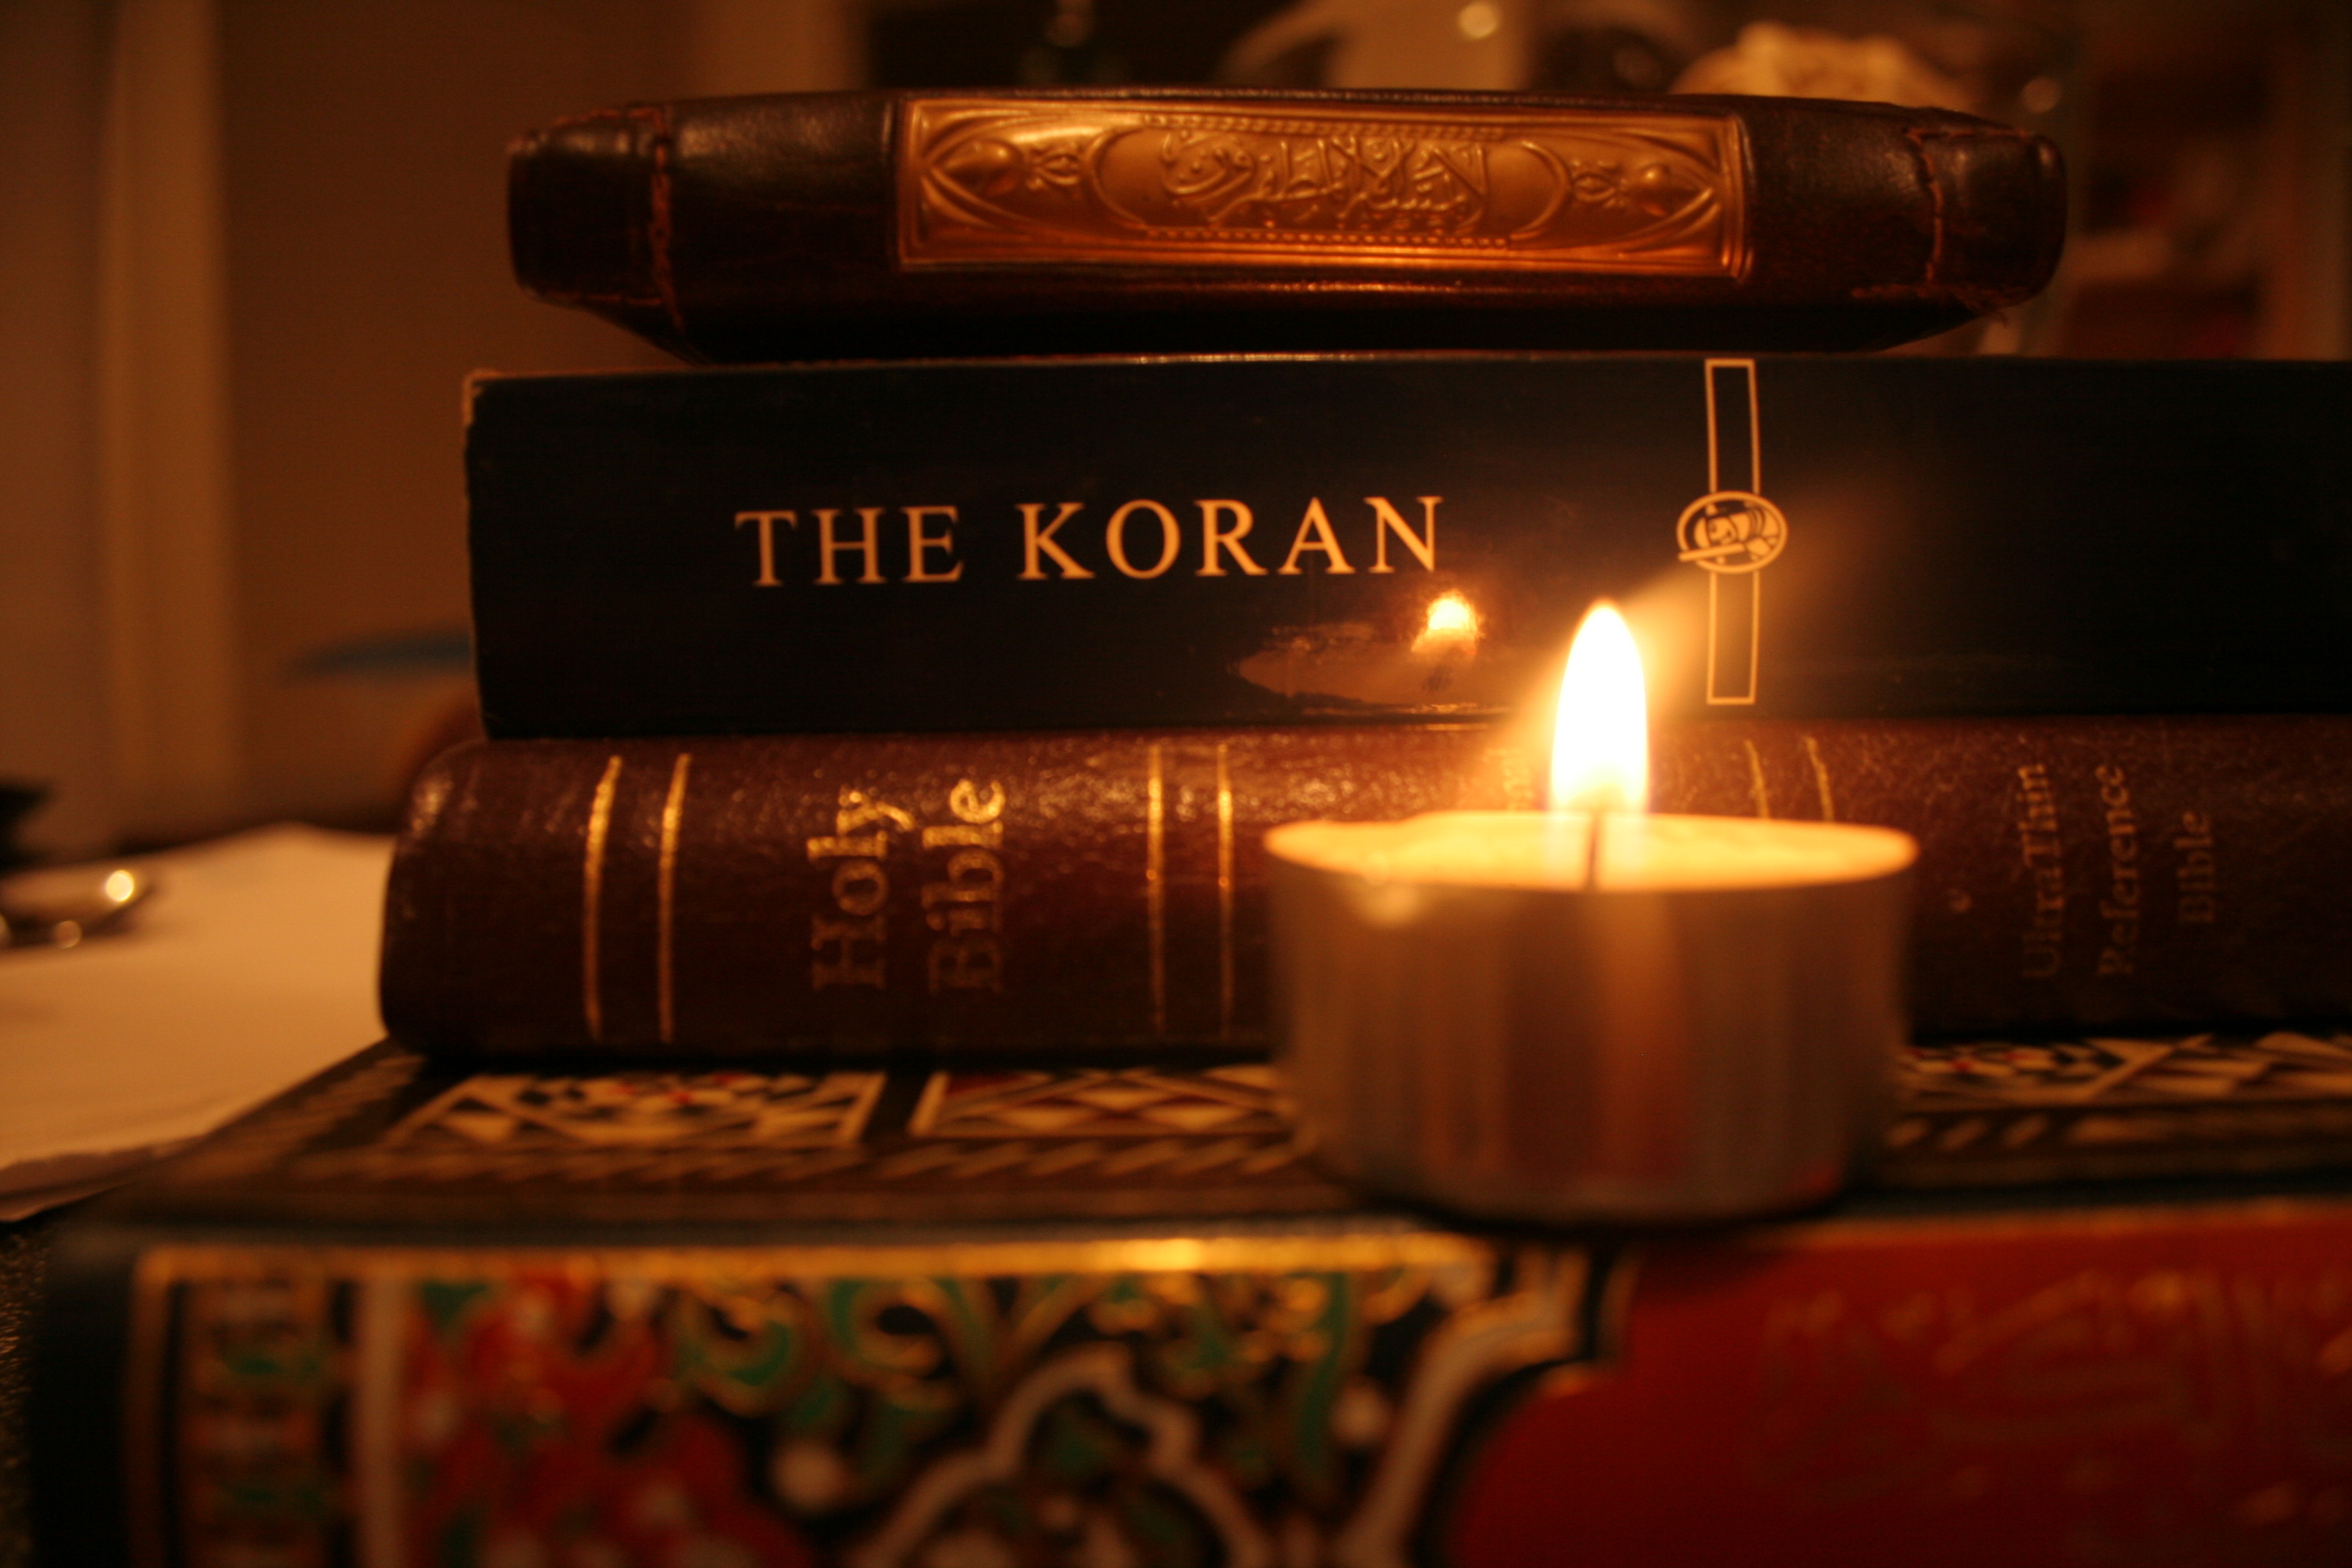 Could the Qur’an Be a Copy of the Bible?